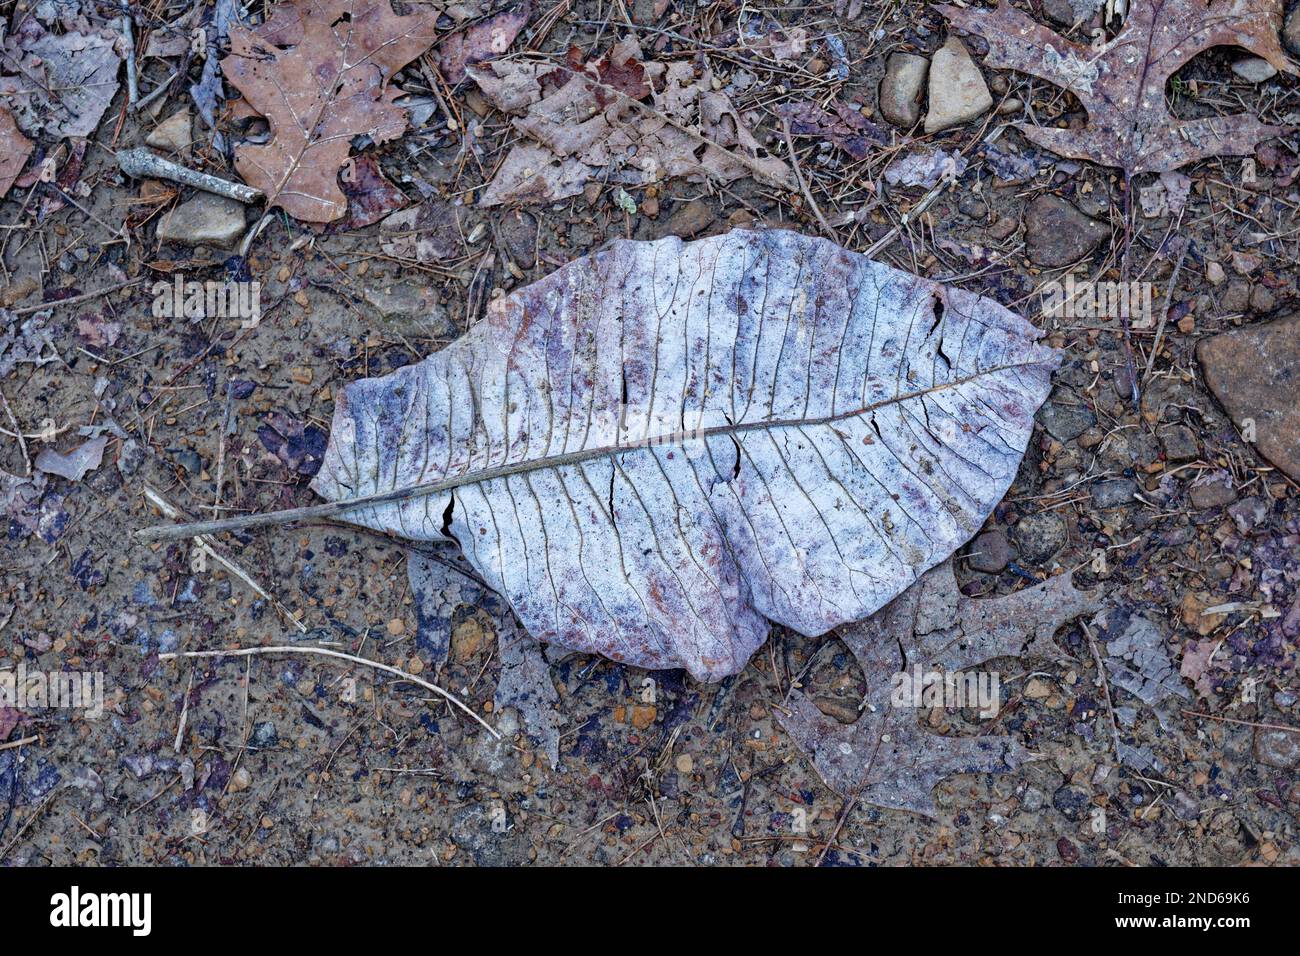 A large leaf of a bigleaf magnolia tree laying flat upside down on the wet trail surrounded by other fallen leaves in the forest closeup view in winte Stock Photo